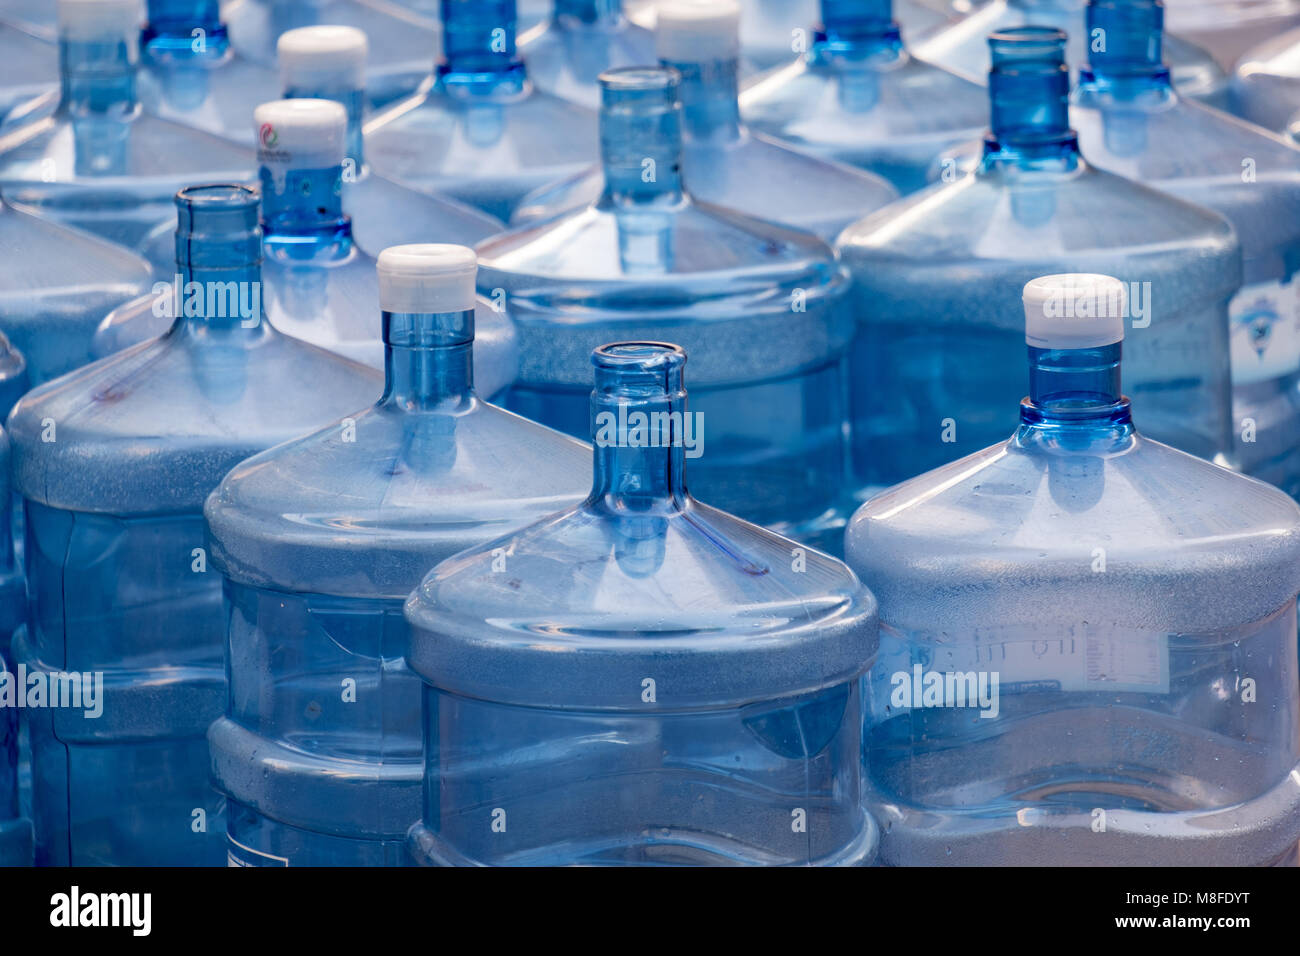 https://c8.alamy.com/comp/M8FDYT/accumulated-water-bottles-on-street-to-pick-by-water-delivery-van-M8FDYT.jpg